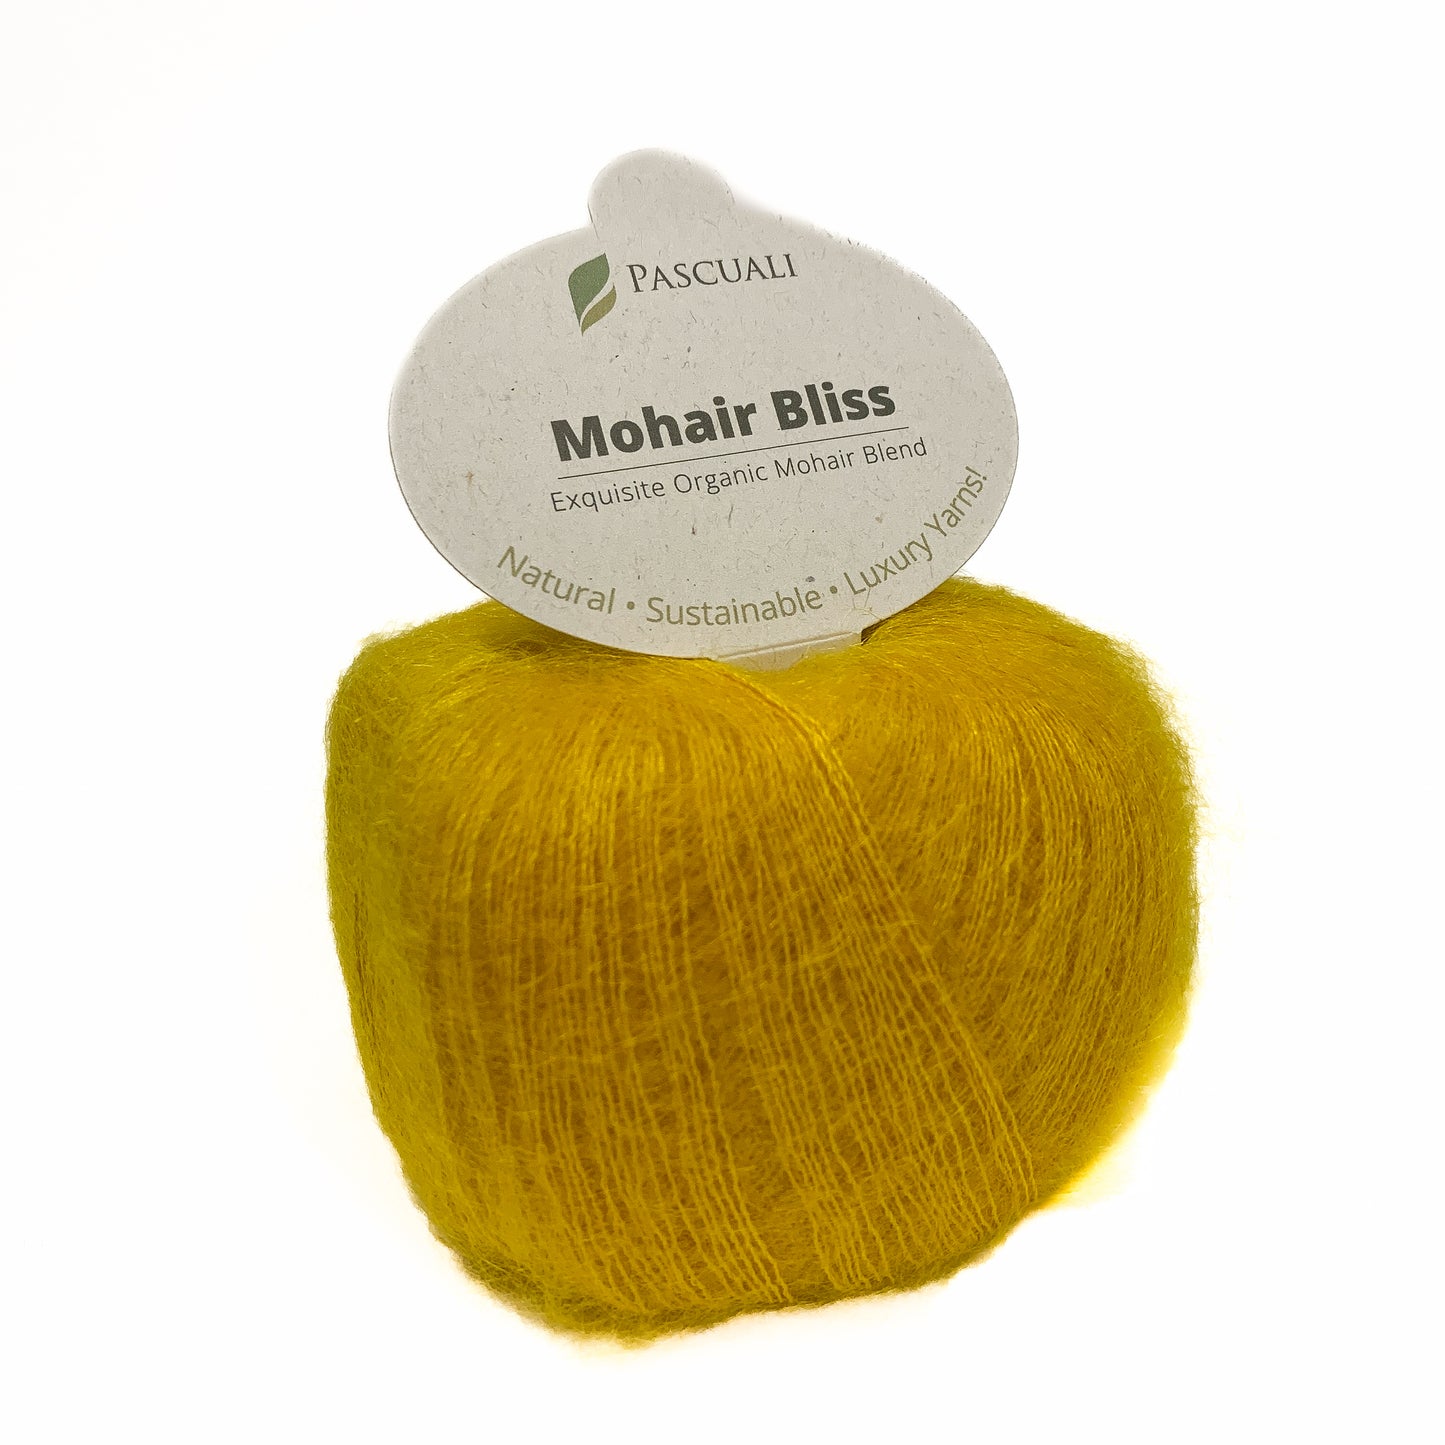 Pascuali - Mohair Bliss